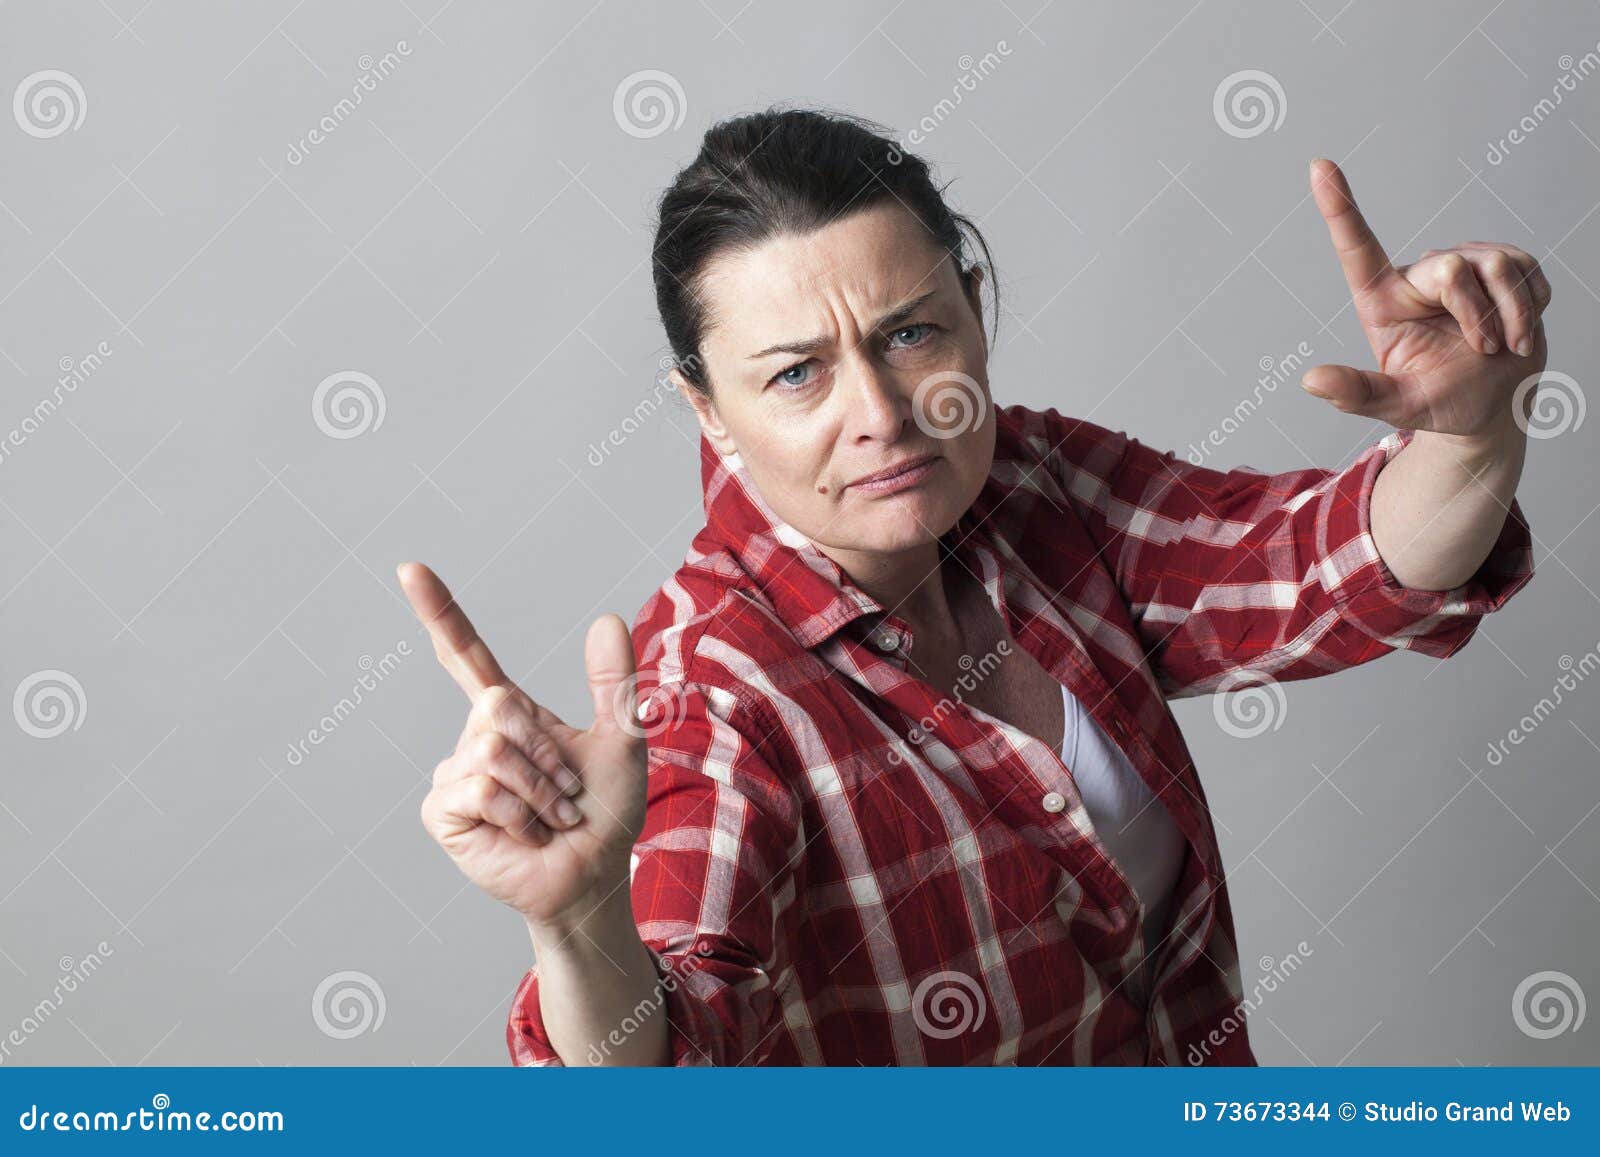 Female Rapper Showing An Aggressive Hand Gesture For Arrogant Attitude Royalty Free Stock Image